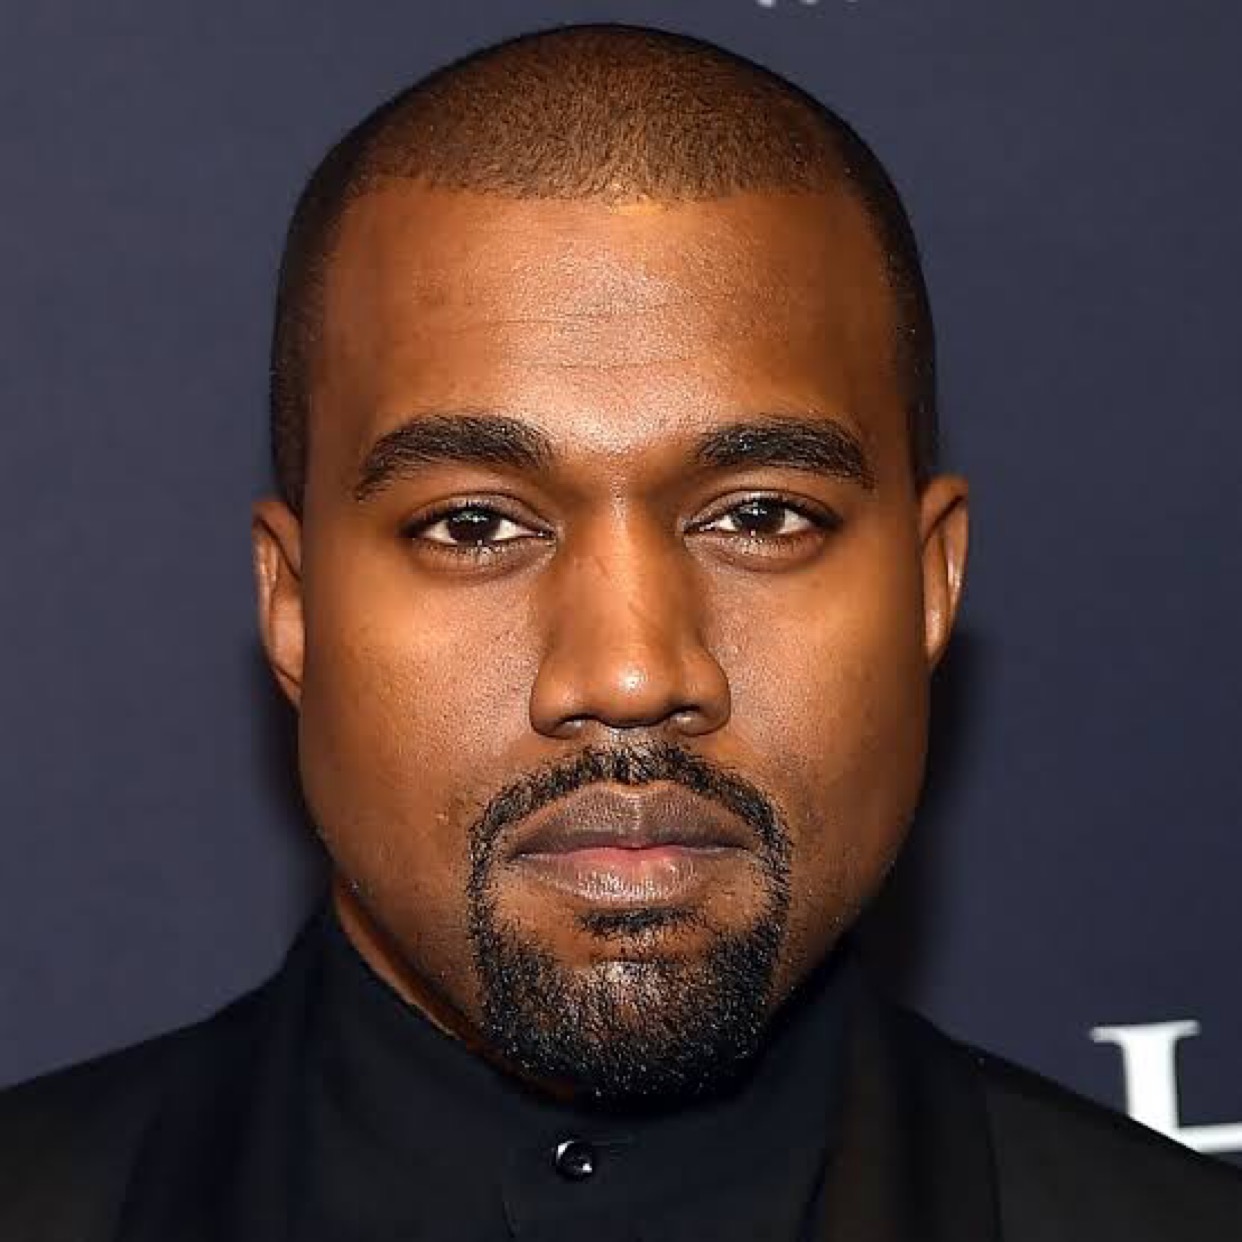 Who Goes For An Event And Refuses To Leave The Venue? - Only Kanye West